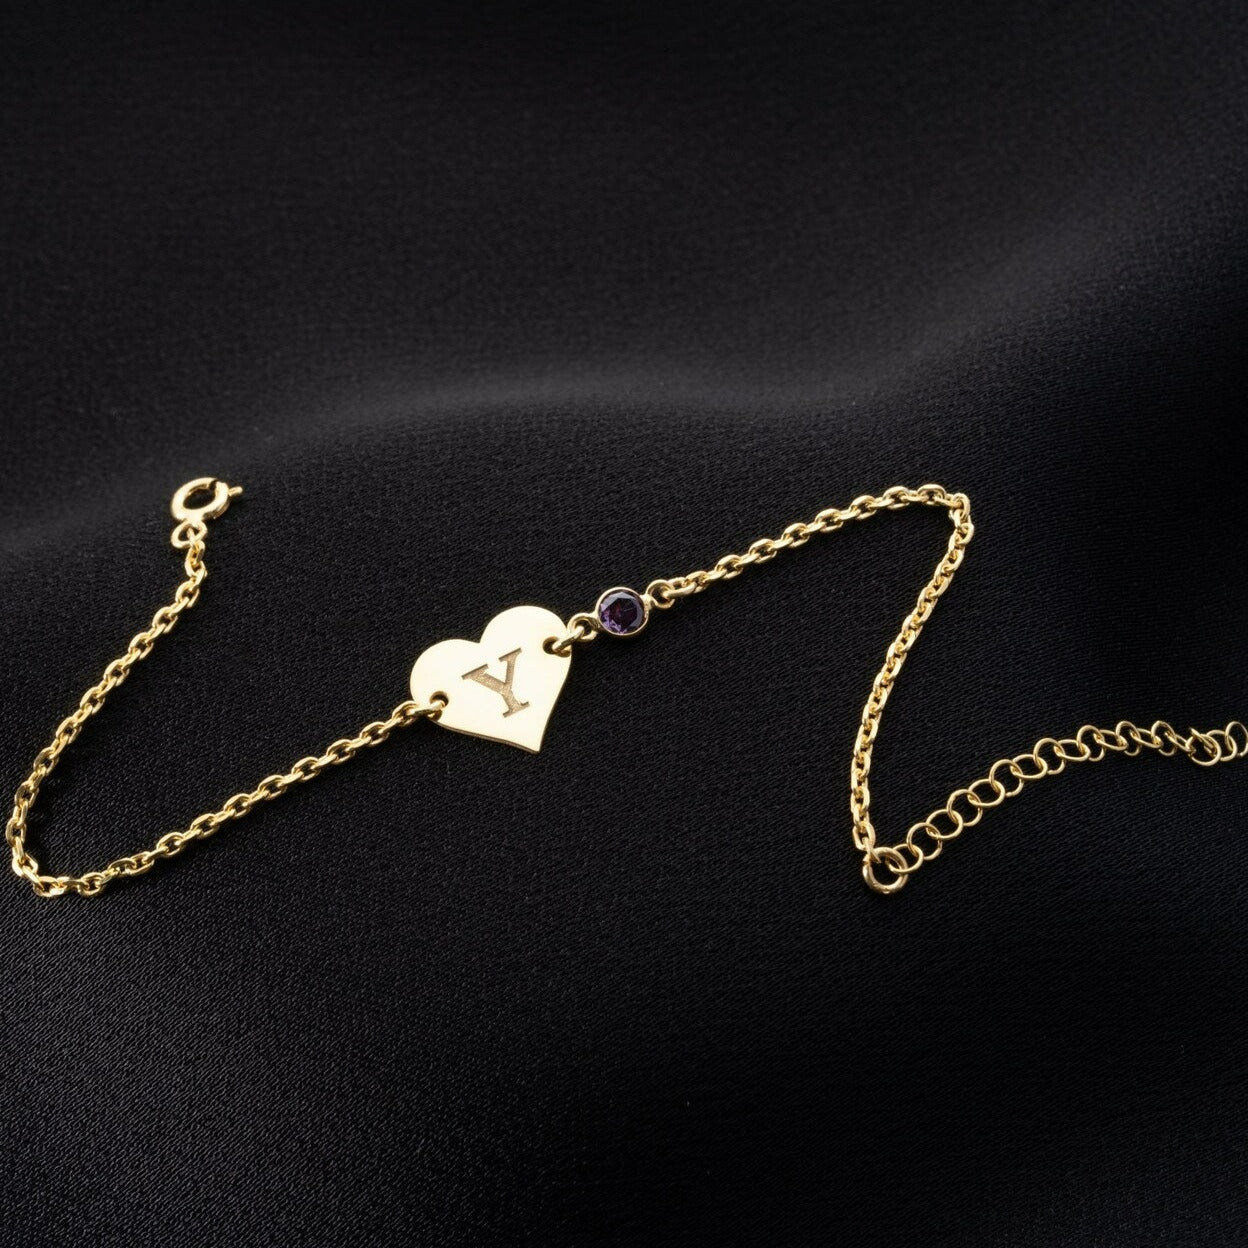 Gold bracelets for women Dubai, gold necklaces for her dubai, luxury gifts for her, valentine's day gifts dubai